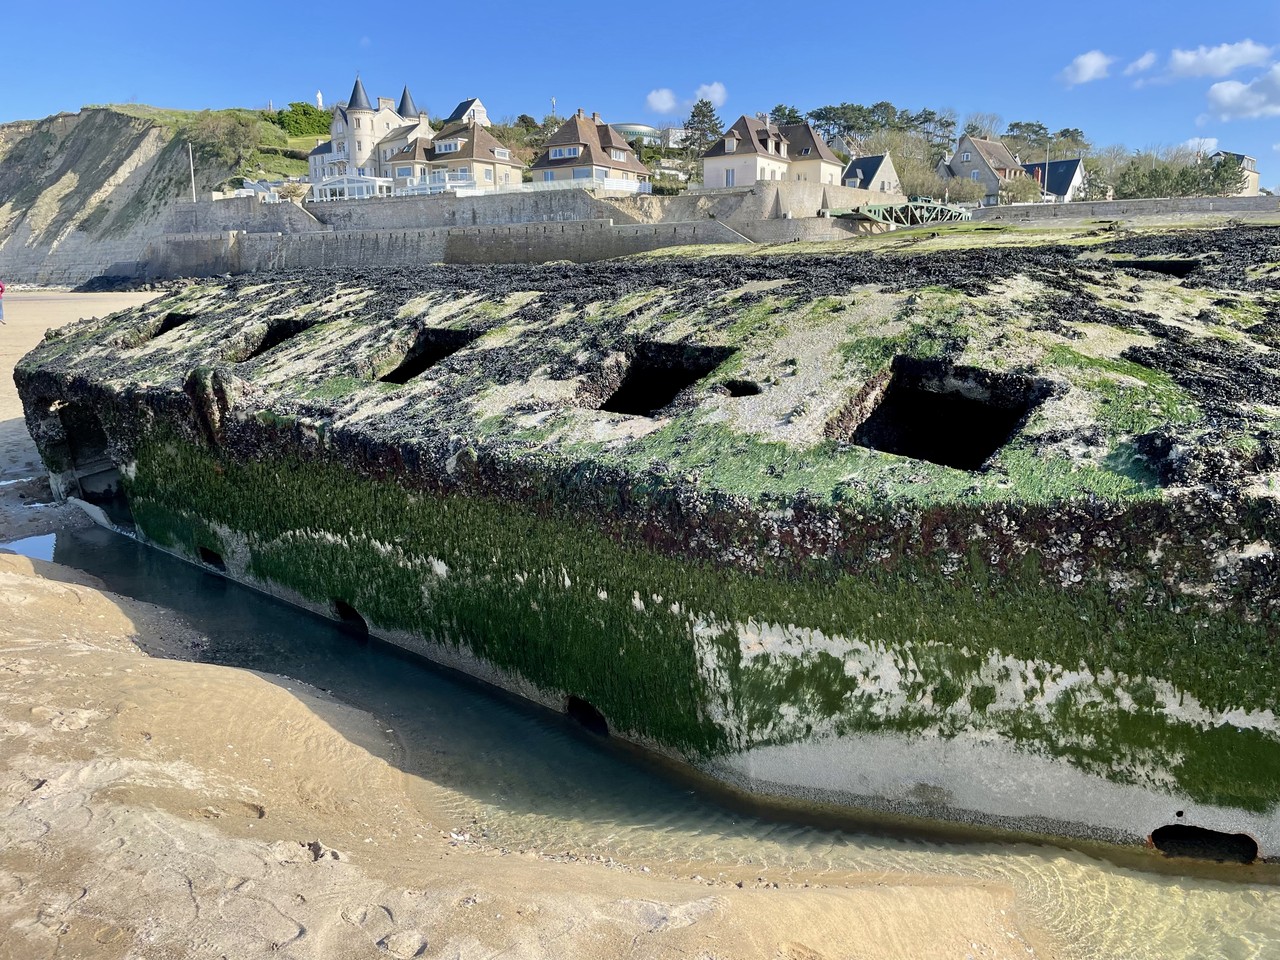 Arromanches occupation to liberation